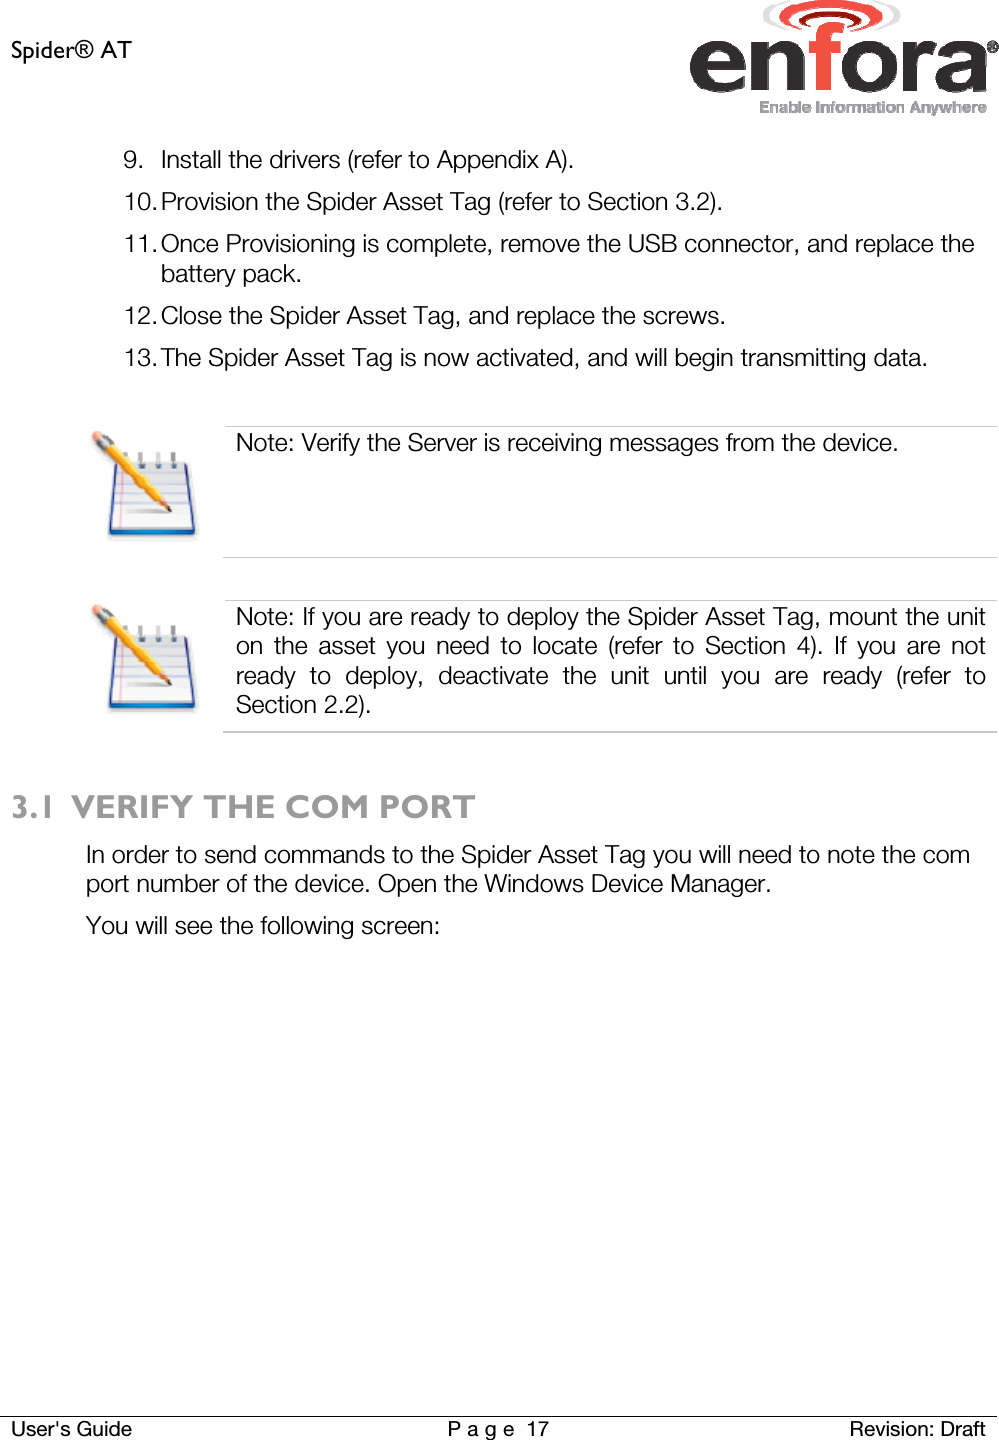 Spider® AT     User&apos;s Guide  P a g e 17 Revision: Draft 9. Install the drivers (refer to Appendix A). 10. Provision the Spider Asset Tag (refer to Section 3.2). 11. Once Provisioning is complete, remove the USB connector, and replace the battery pack. 12. Close the Spider Asset Tag, and replace the screws. 13. The Spider Asset Tag is now activated, and will begin transmitting data.   Note: Verify the Server is receiving messages from the device.   Note: If you are ready to deploy the Spider Asset Tag, mount the unit on the asset you need to locate (refer to Section 4). If you are not ready to deploy, deactivate the unit until you are ready (refer to Section 2.2).  3.1 VERIFY THE COM PORT In order to send commands to the Spider Asset Tag you will need to note the com port number of the device. Open the Windows Device Manager. You will see the following screen: 